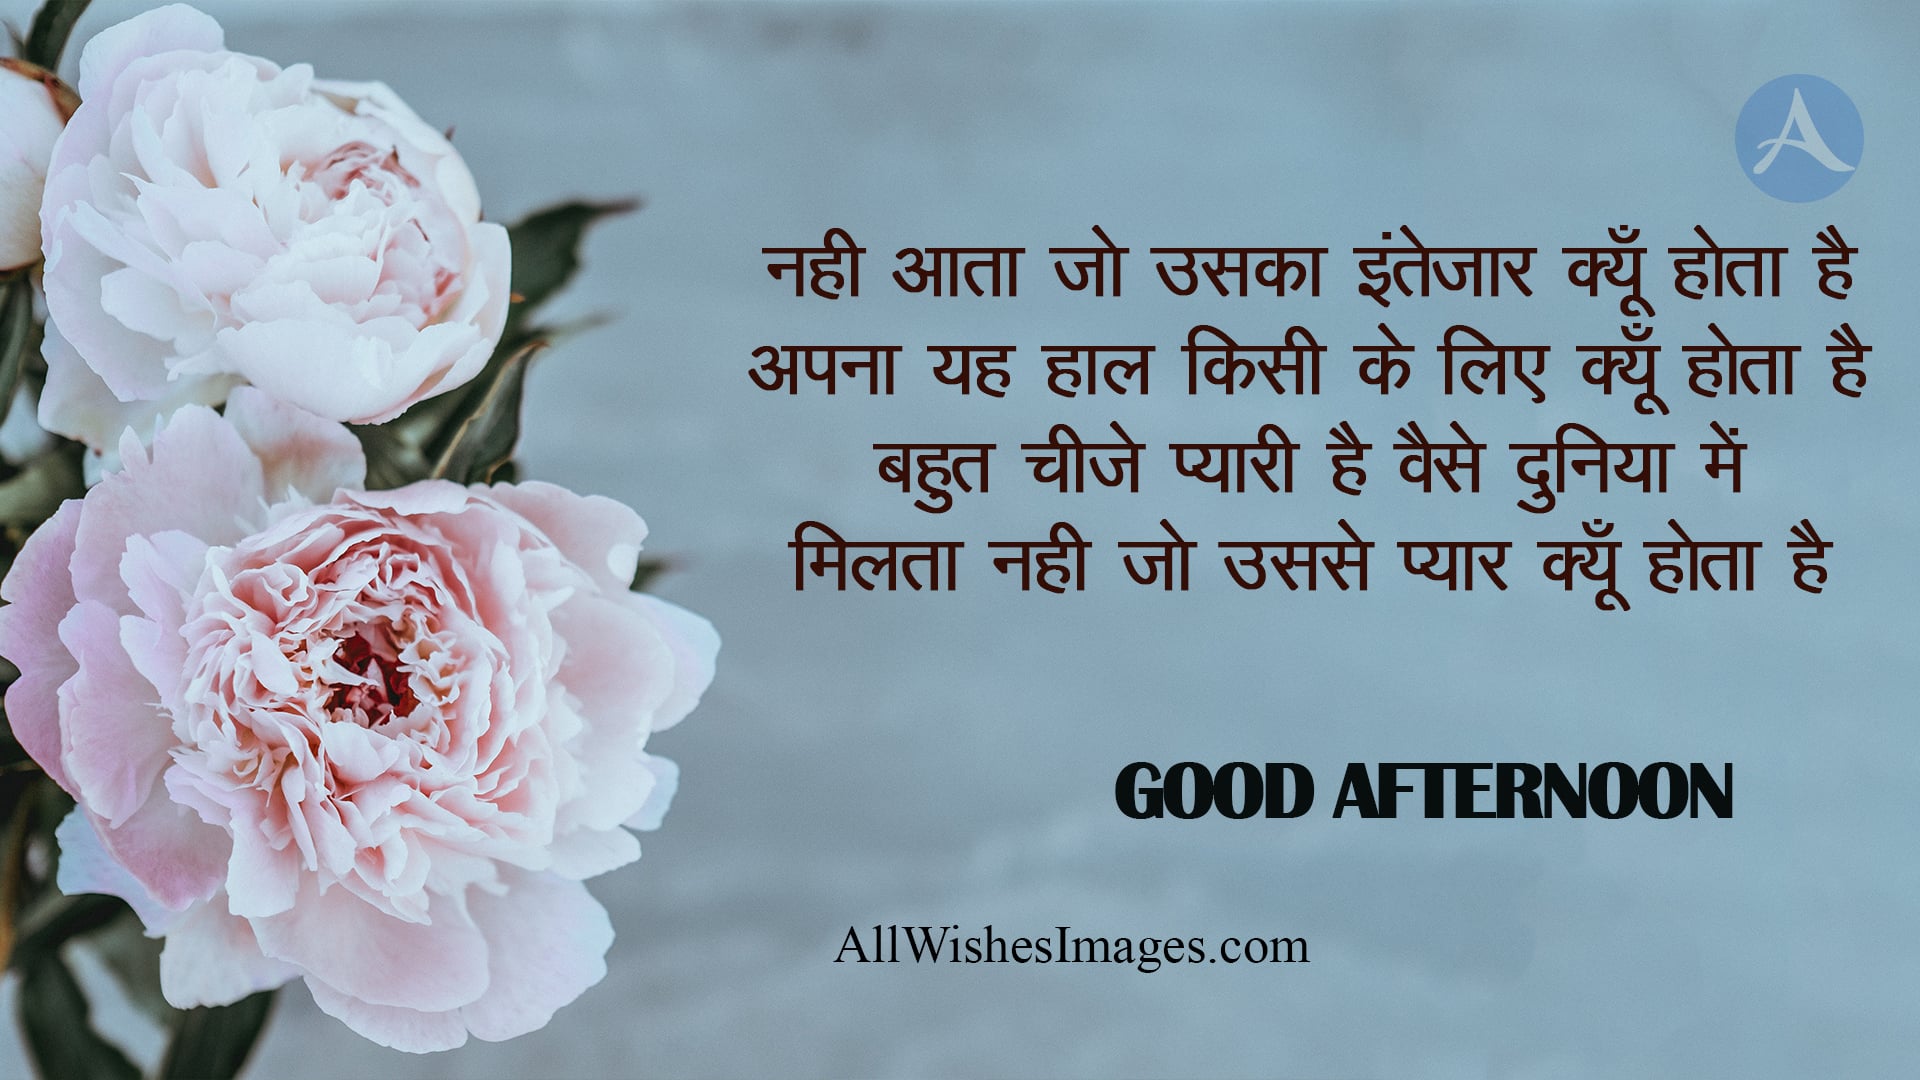 Good Afternoon Images In Hindi - All Wishes Images - Images for WhatsApp